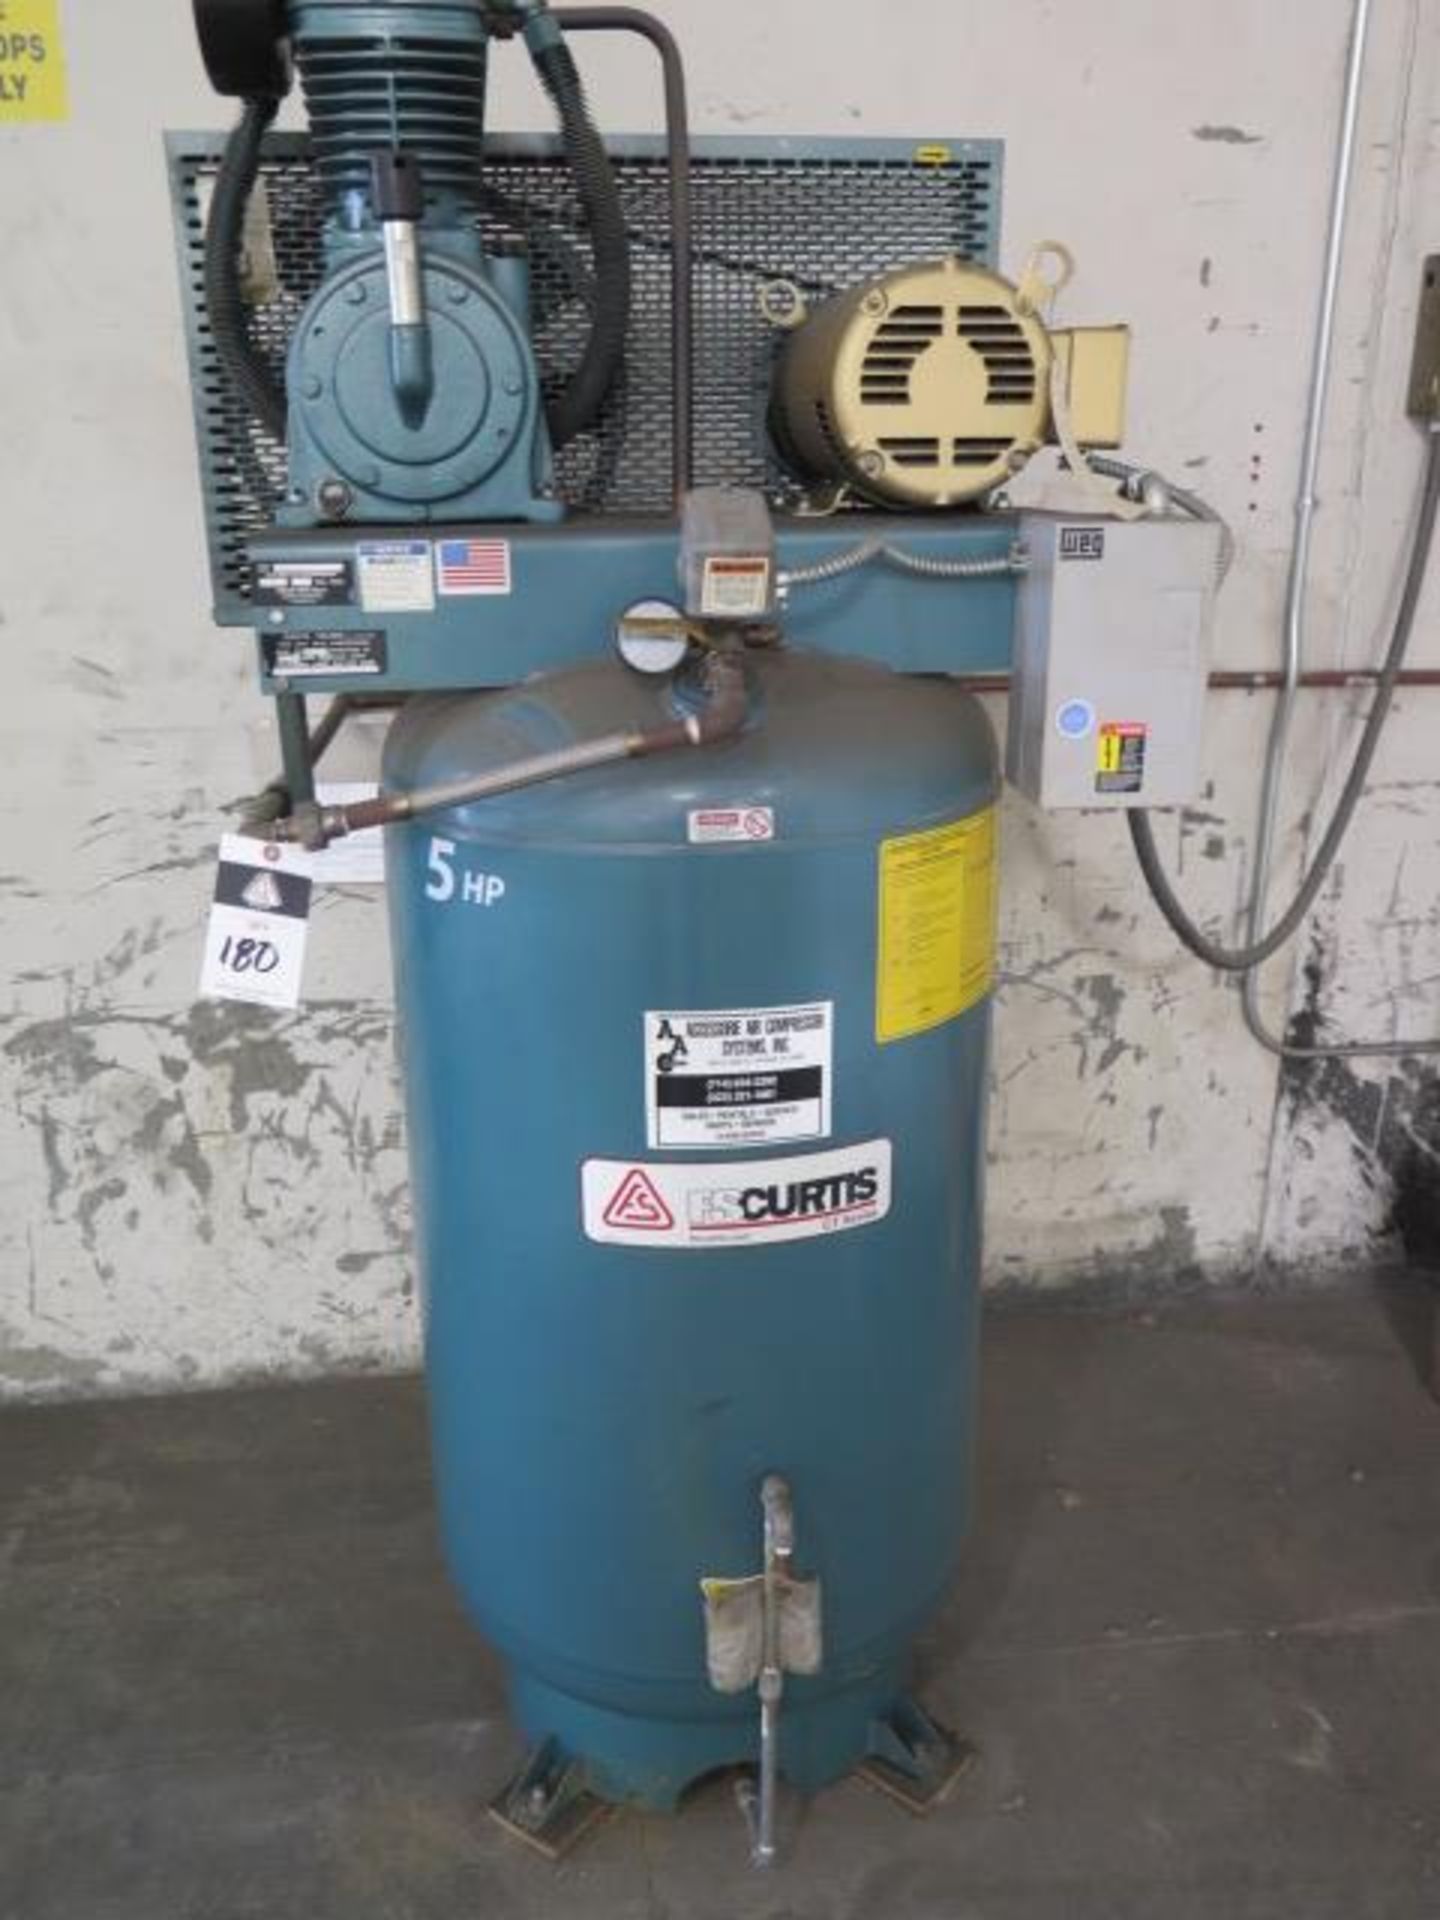 Curtis 5Hp Vertical Air Compressor w/ 80 Gallon Tank (SOLD AS-IS - NO WARRANTY)